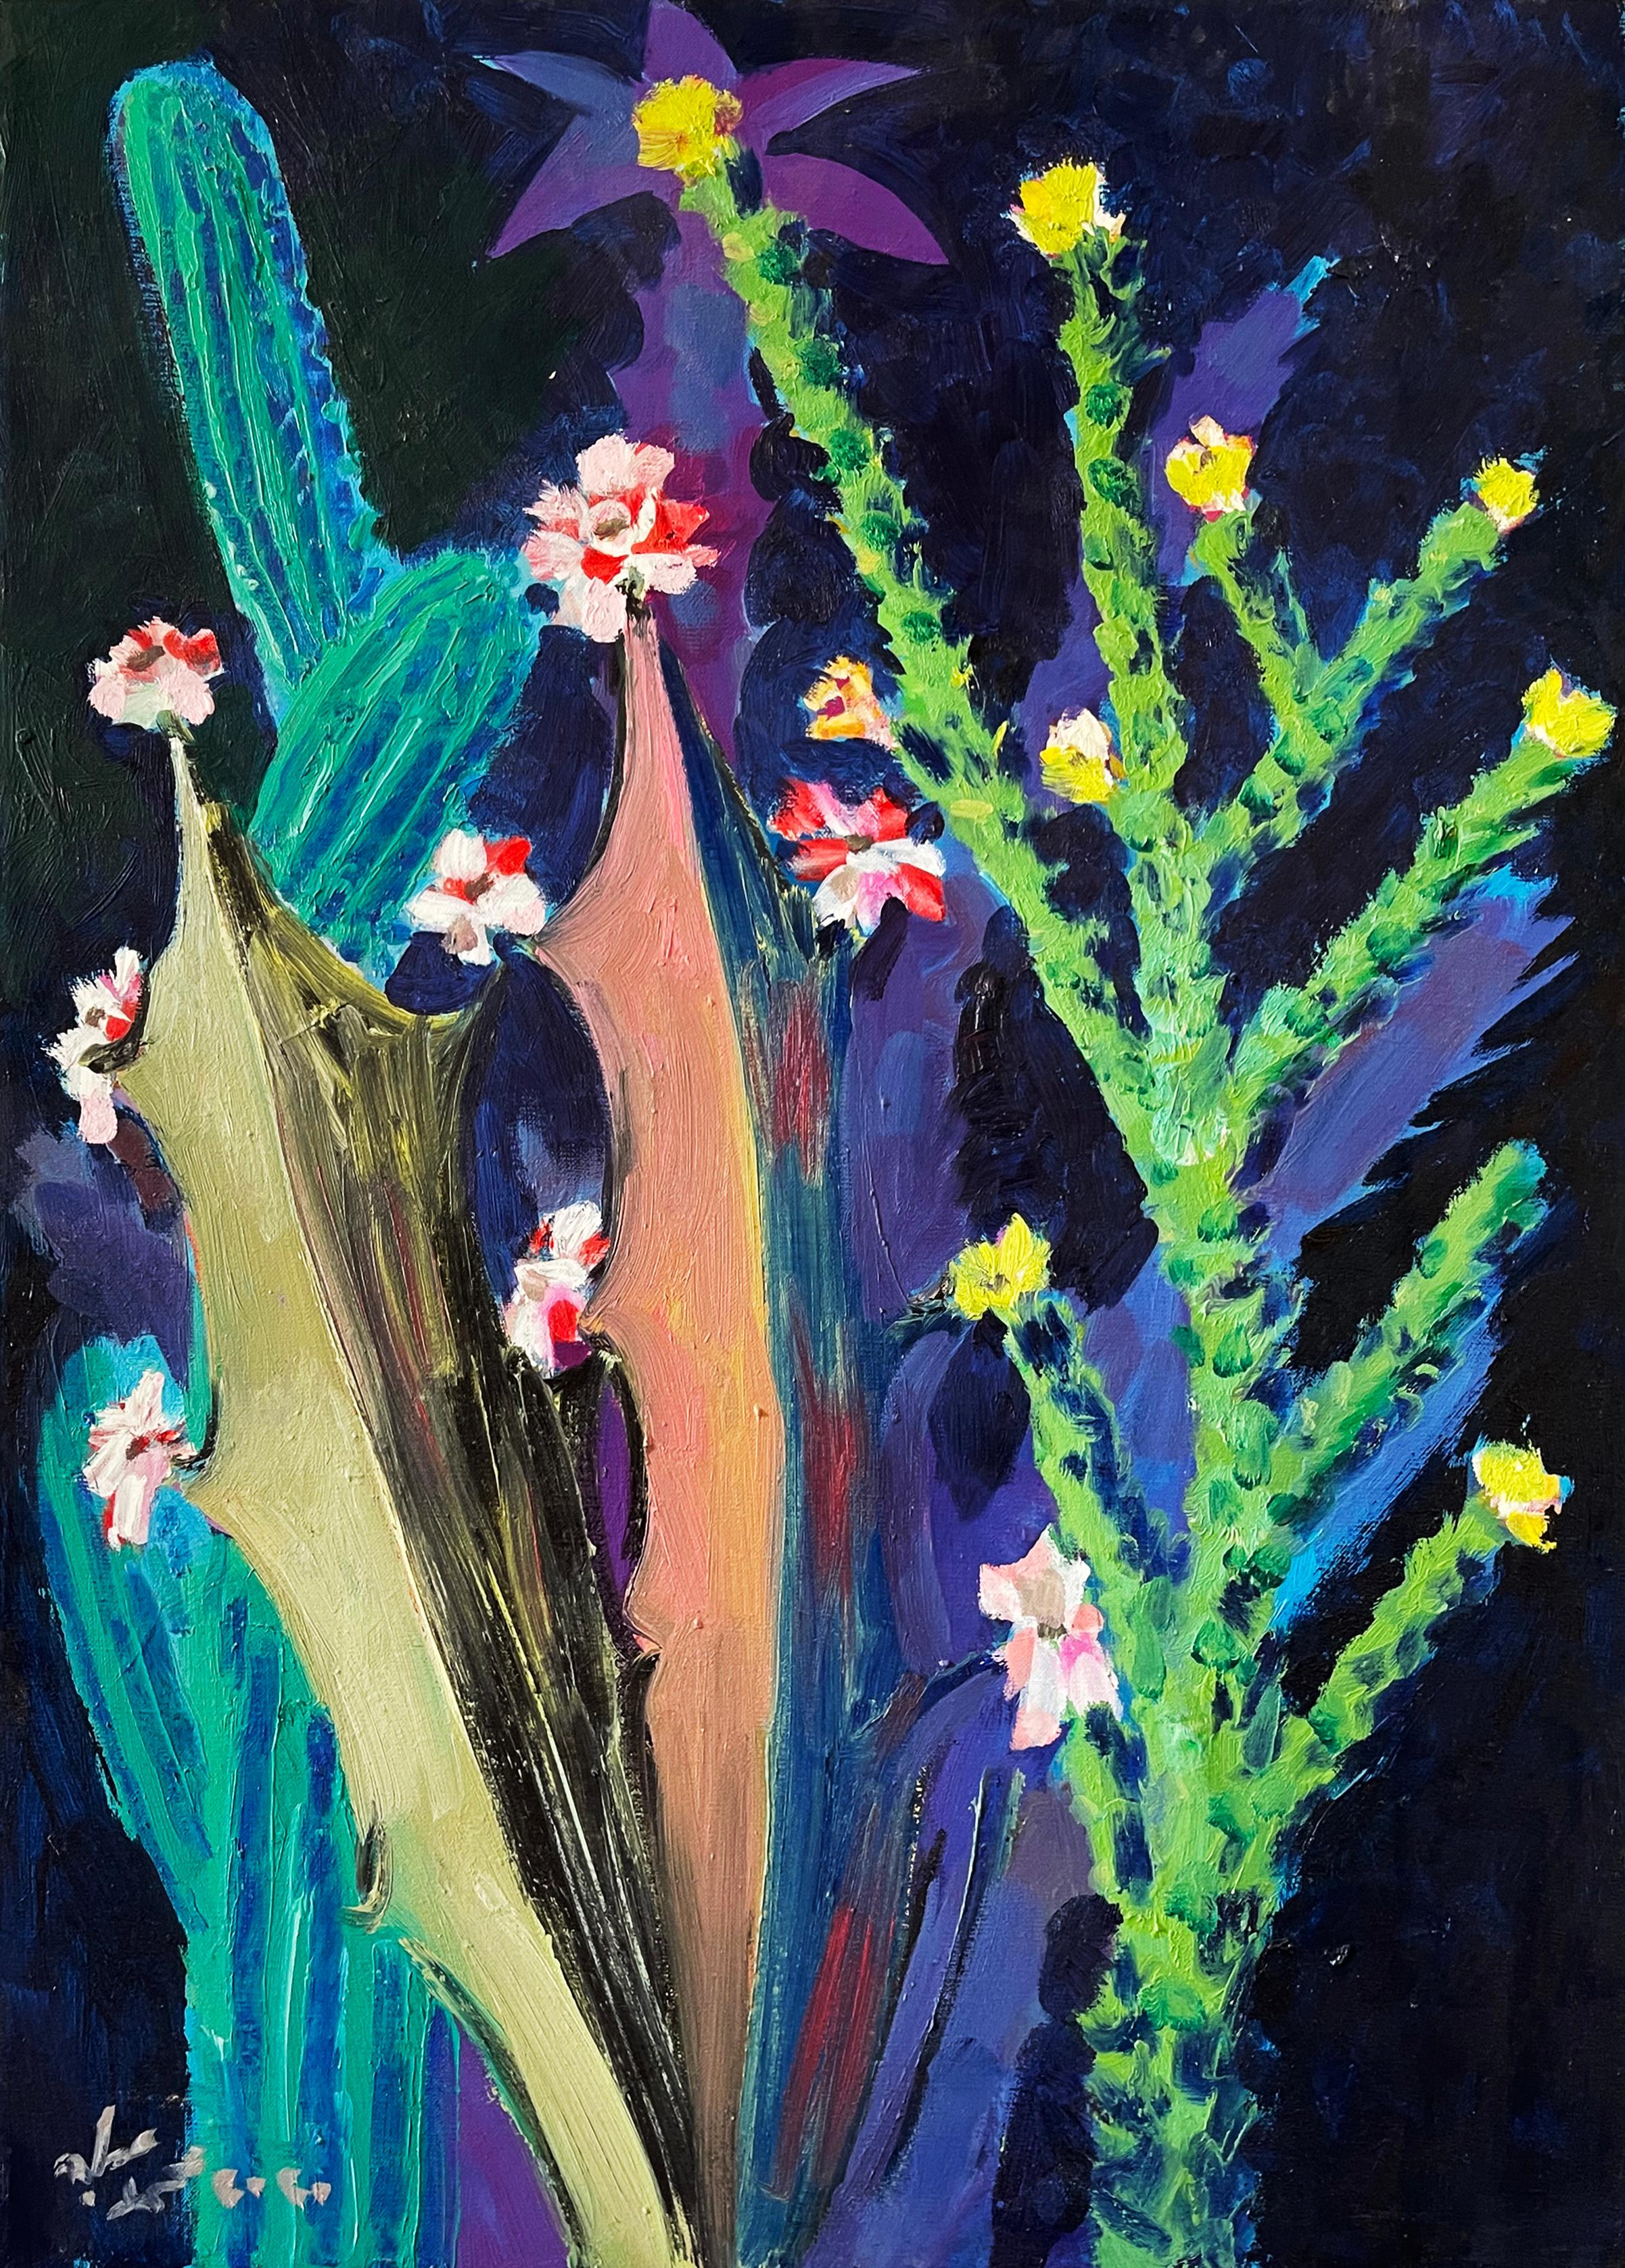 "Cactus by Night II" Oil Painting 35" x 26" inch by Mohamed Abla